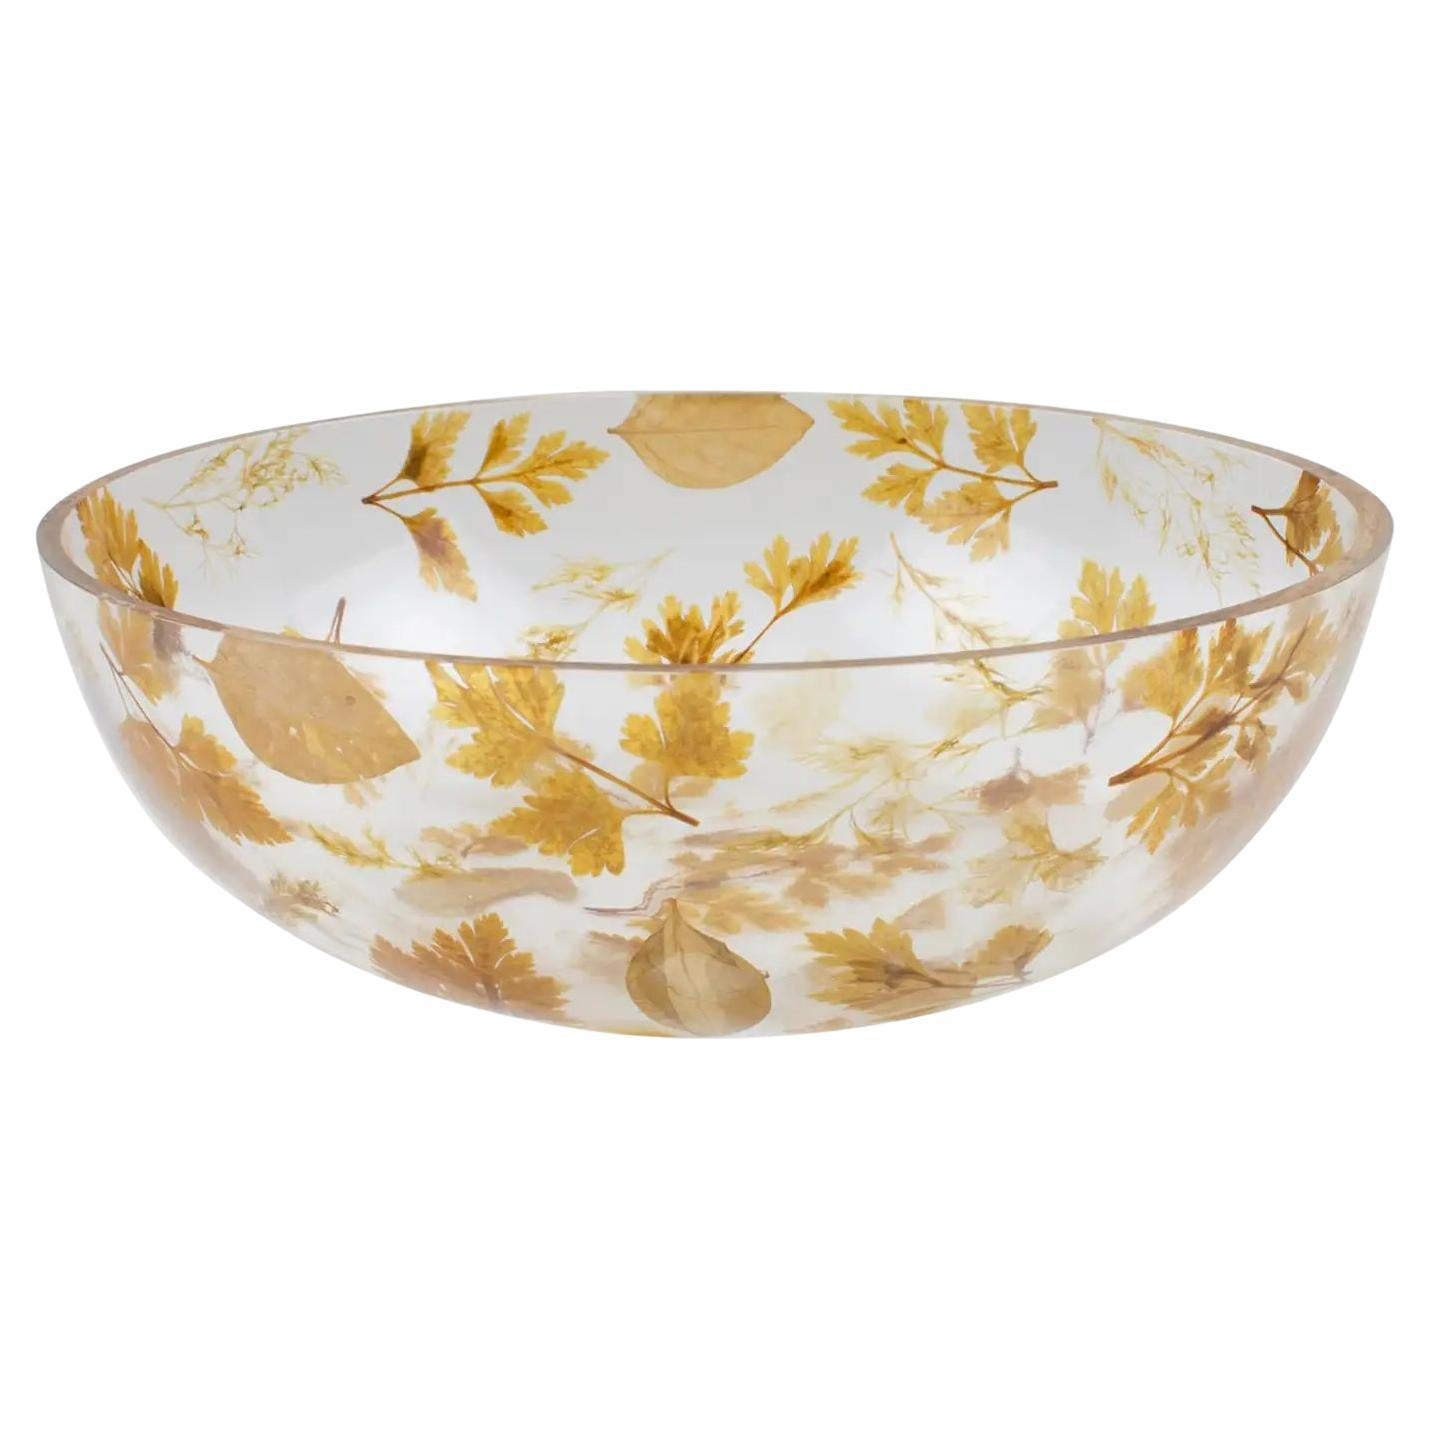 Resin Centerpiece Serving Bowl with Leaves Inclusions, Italy 1970s